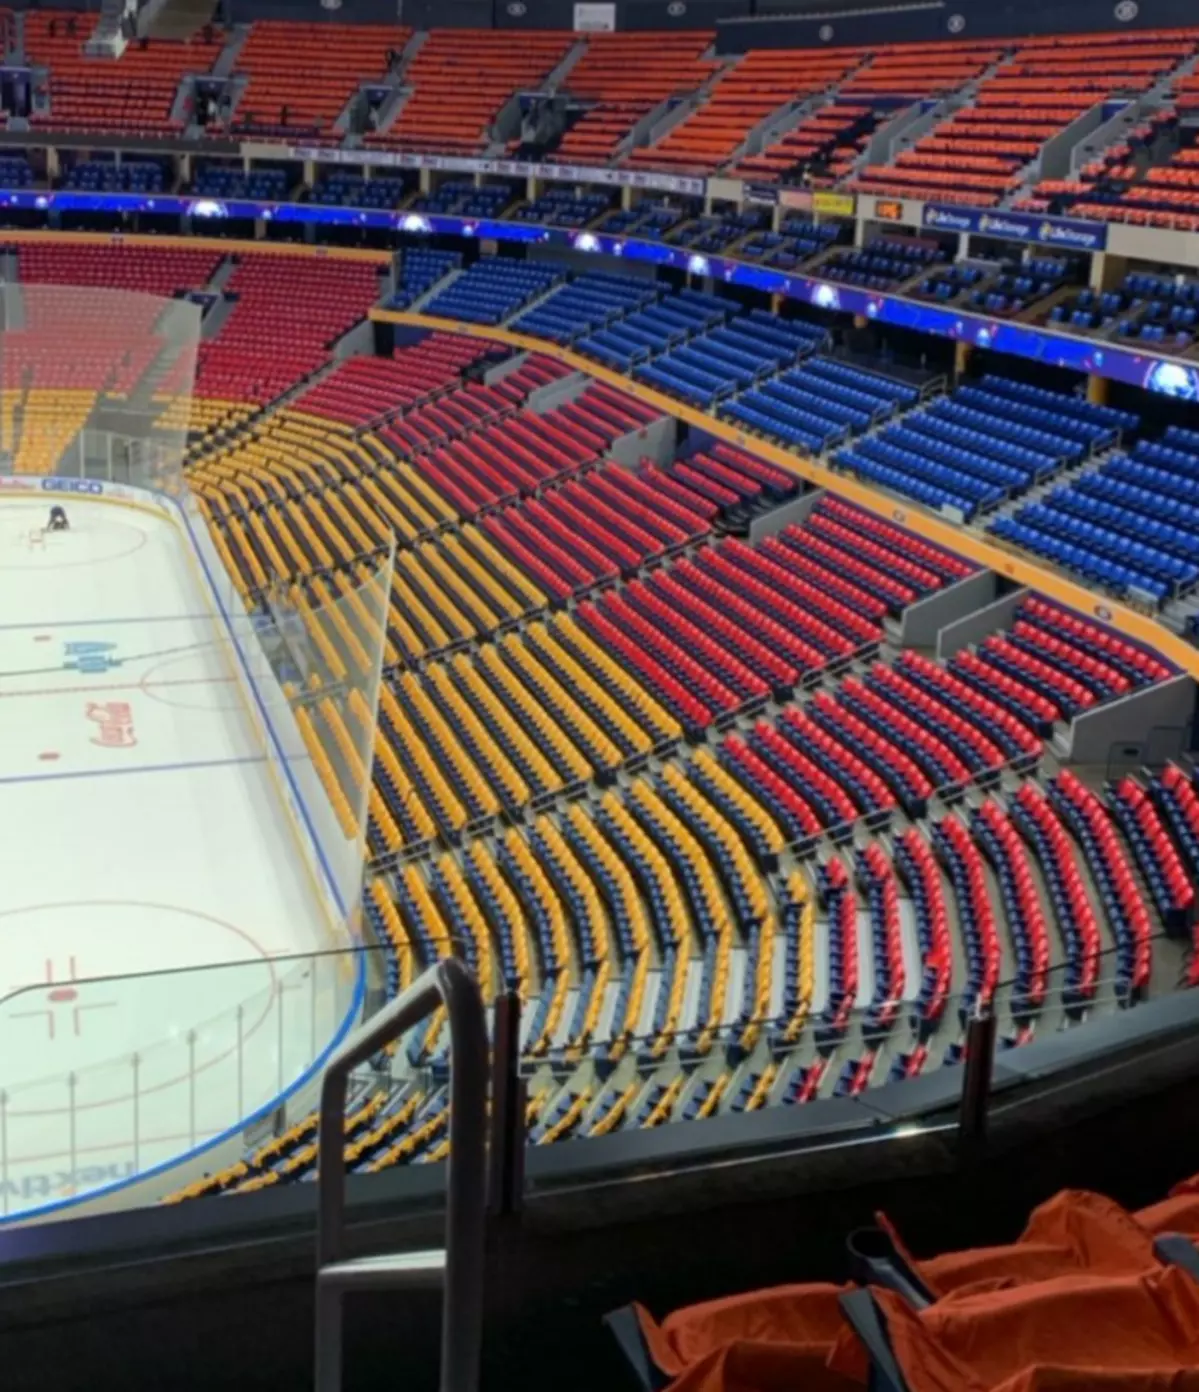 LOOK Key Bank Center Looks Like The Aud Tonight Only + It Is Awesome